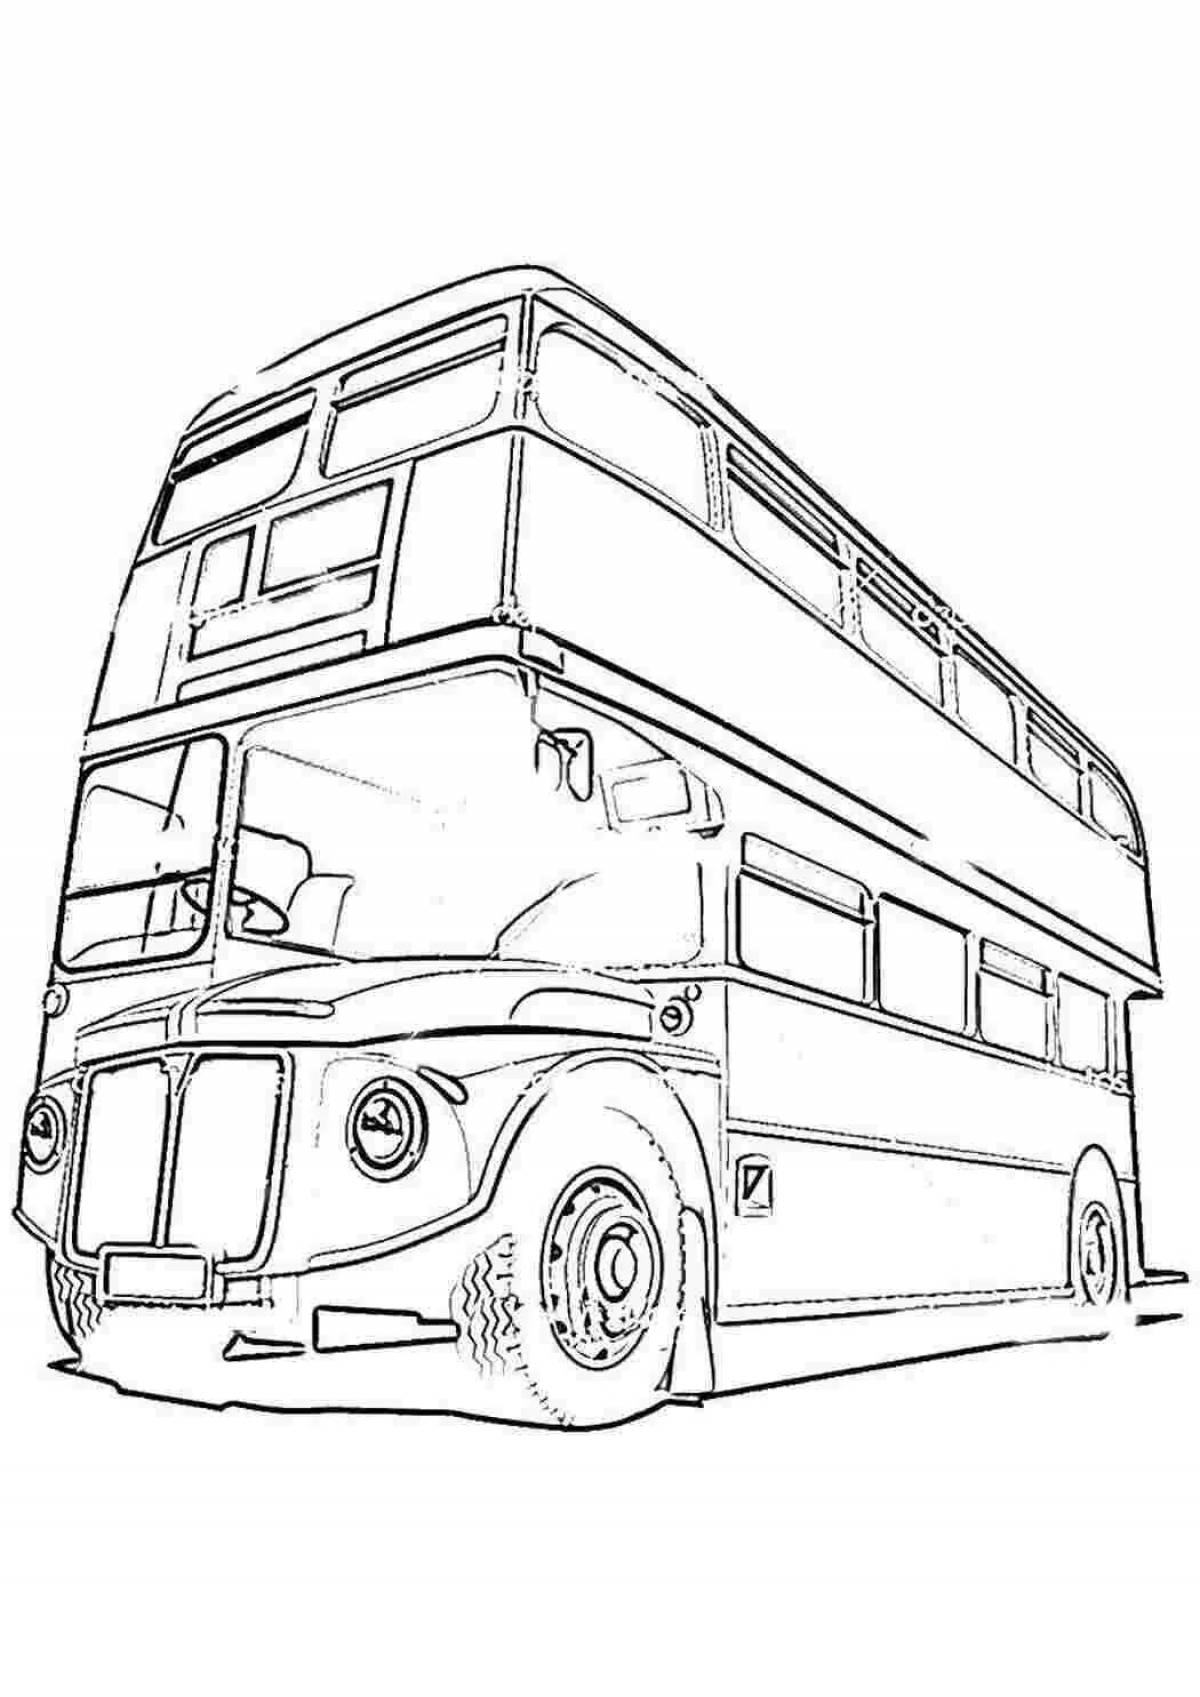 Glowing English bus coloring page